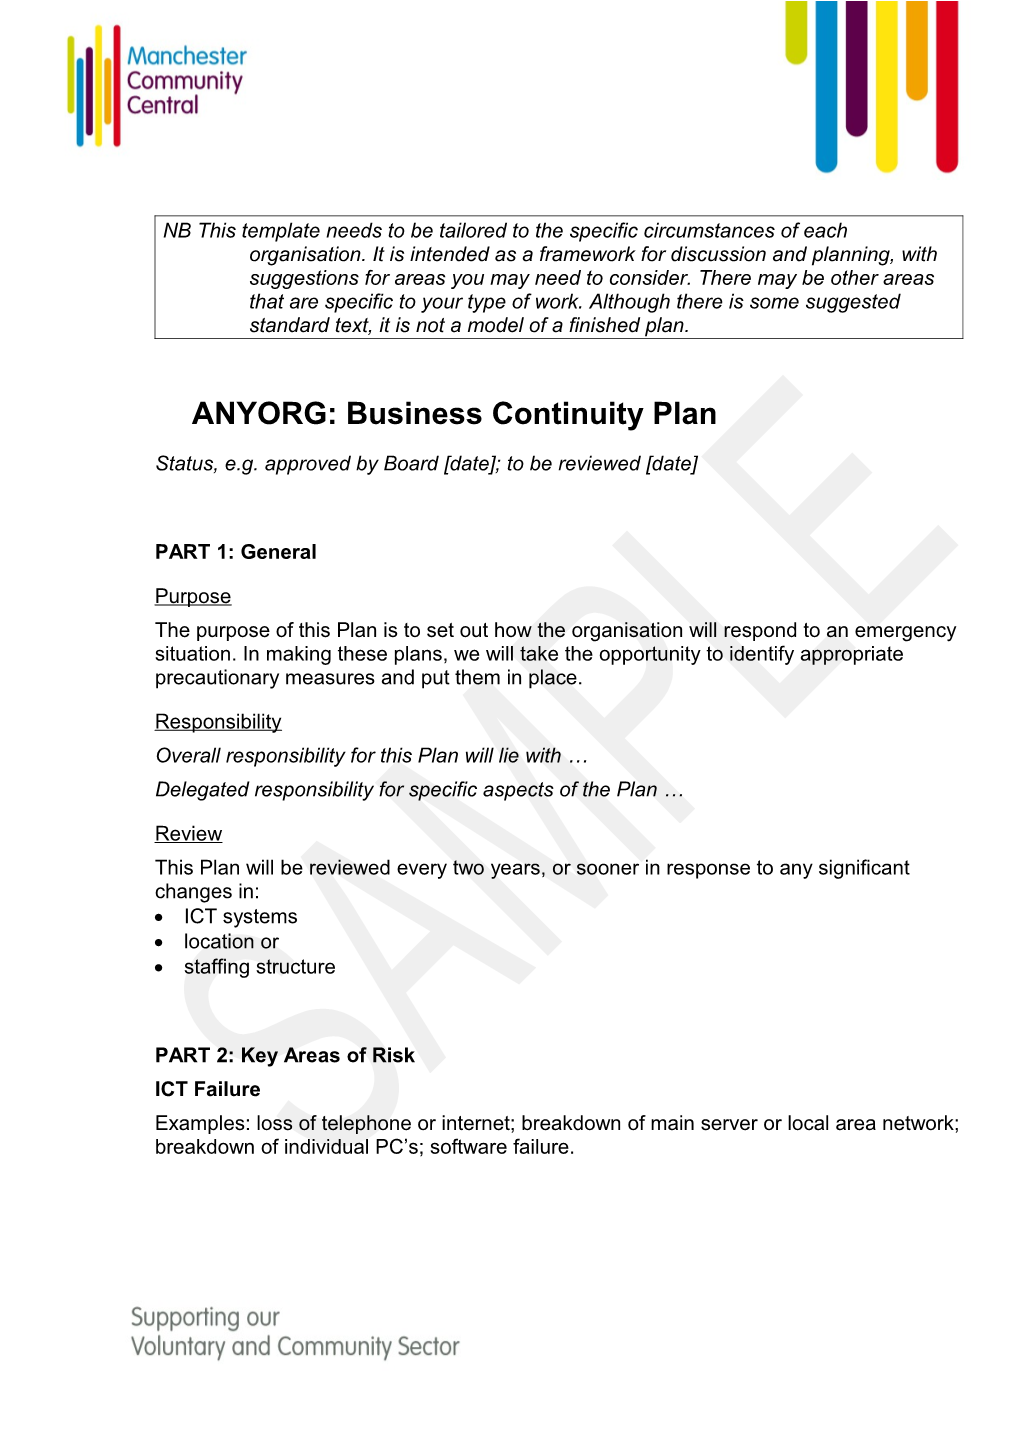 ANYORG: Business Continuity Plan